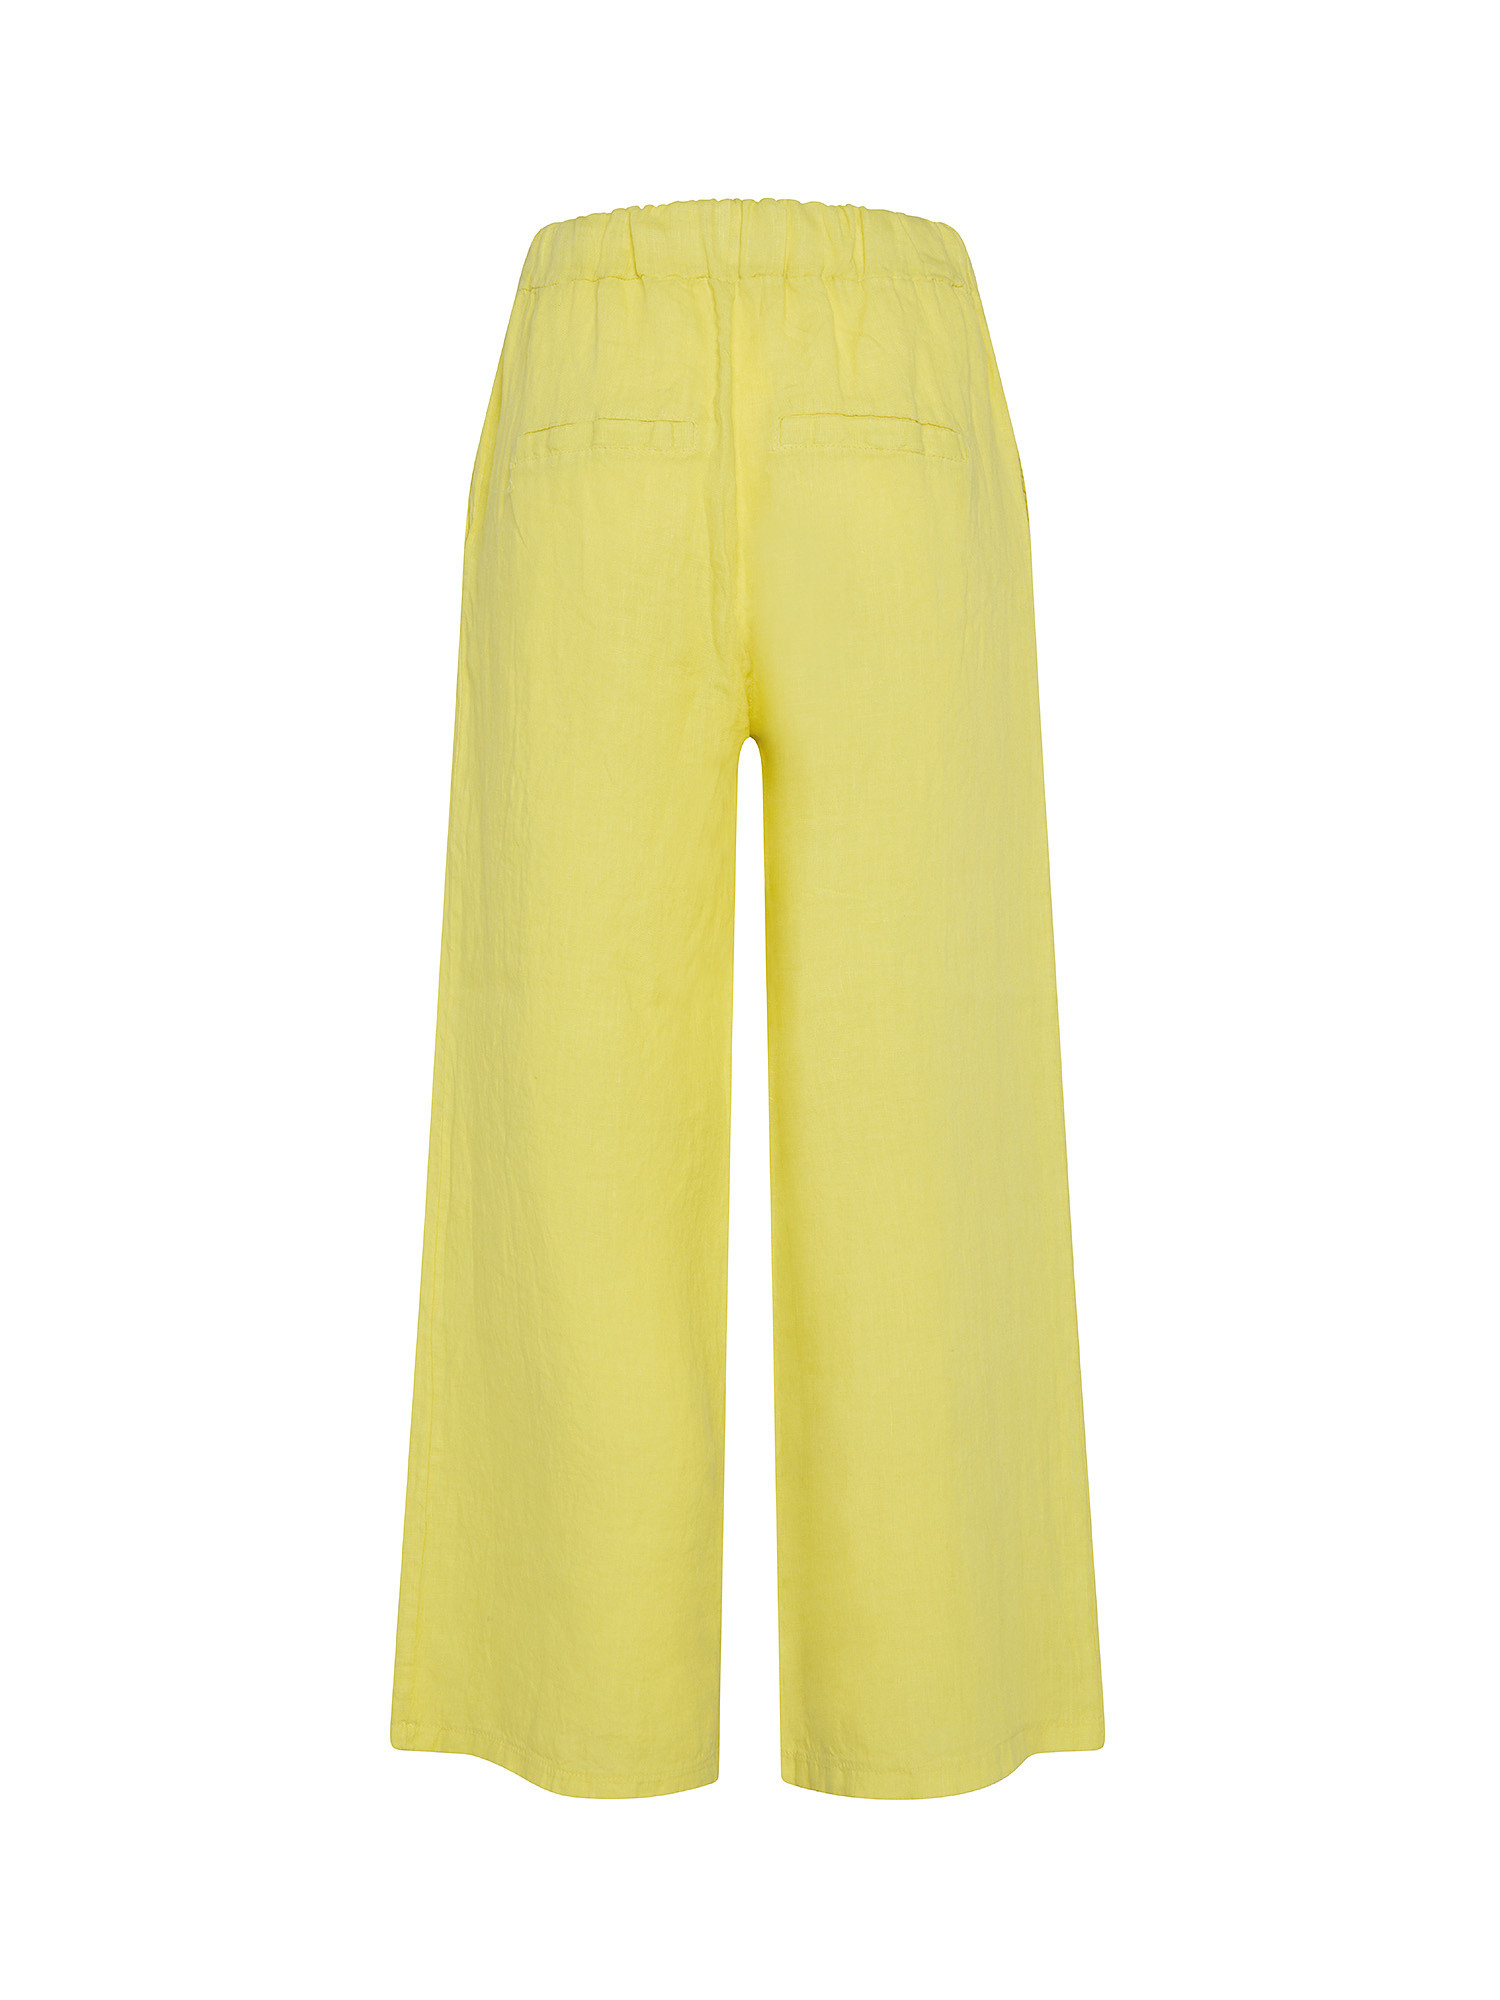 Koan - Wide linen trousers, Yellow, large image number 1